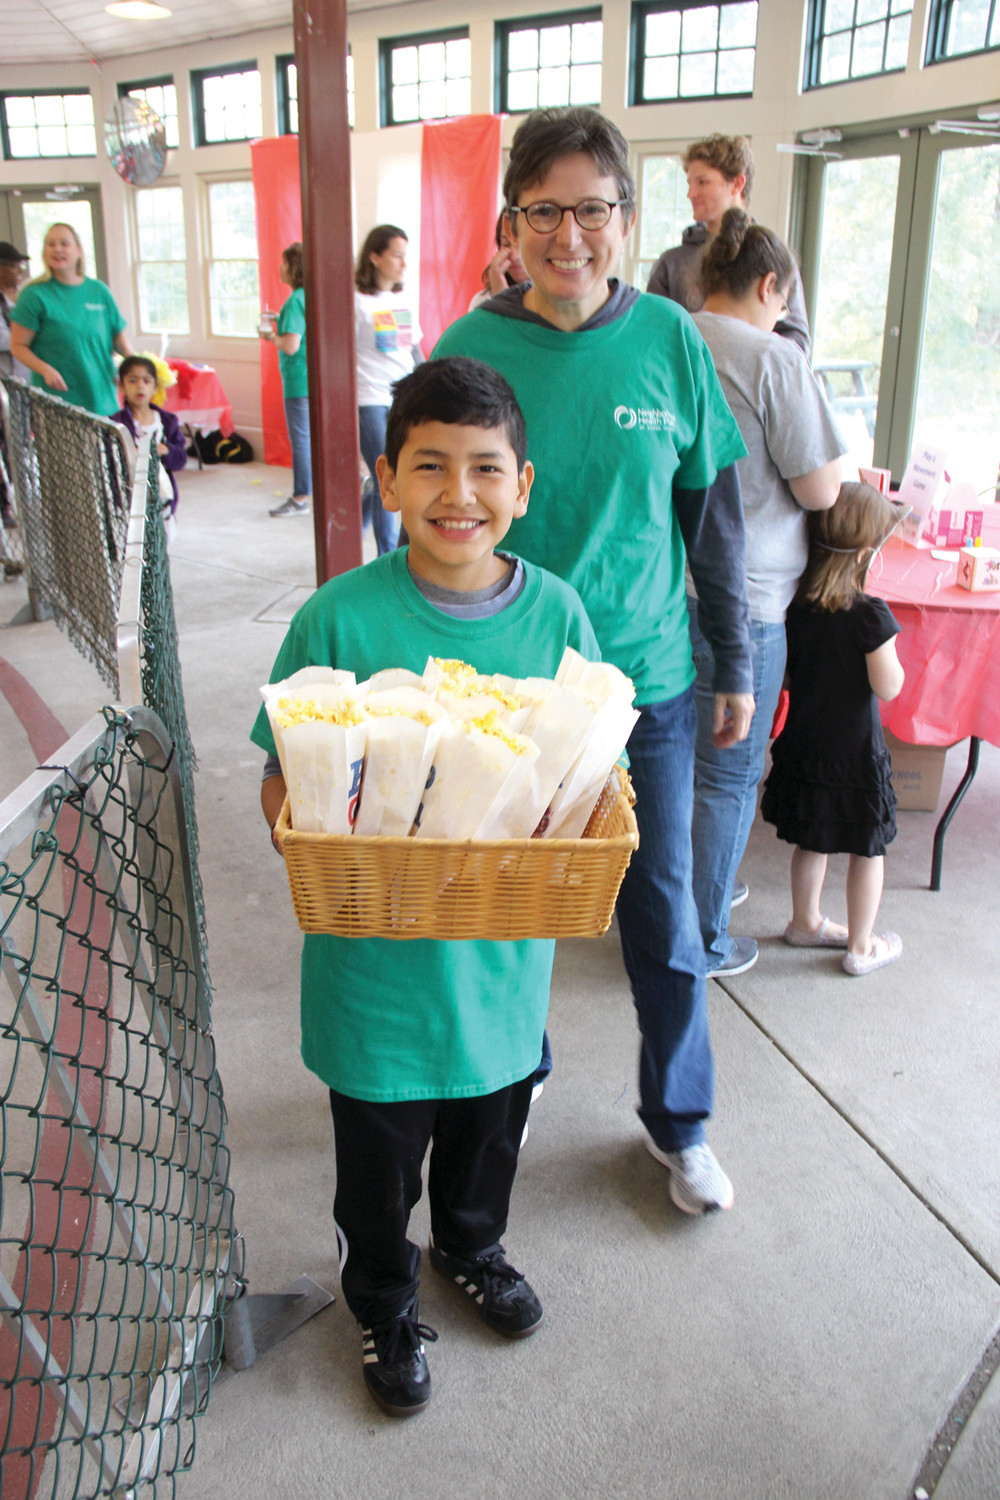 IT WAS A HIT: Cal helps his mom, Lisa Carcieri hand out free popcorn at Saturday’s event. Neighborhood Health Plan of RI is a major sponsor of Reach Out and Read and about 20 NHPRI employees volunteered to help with Saturday’s event.